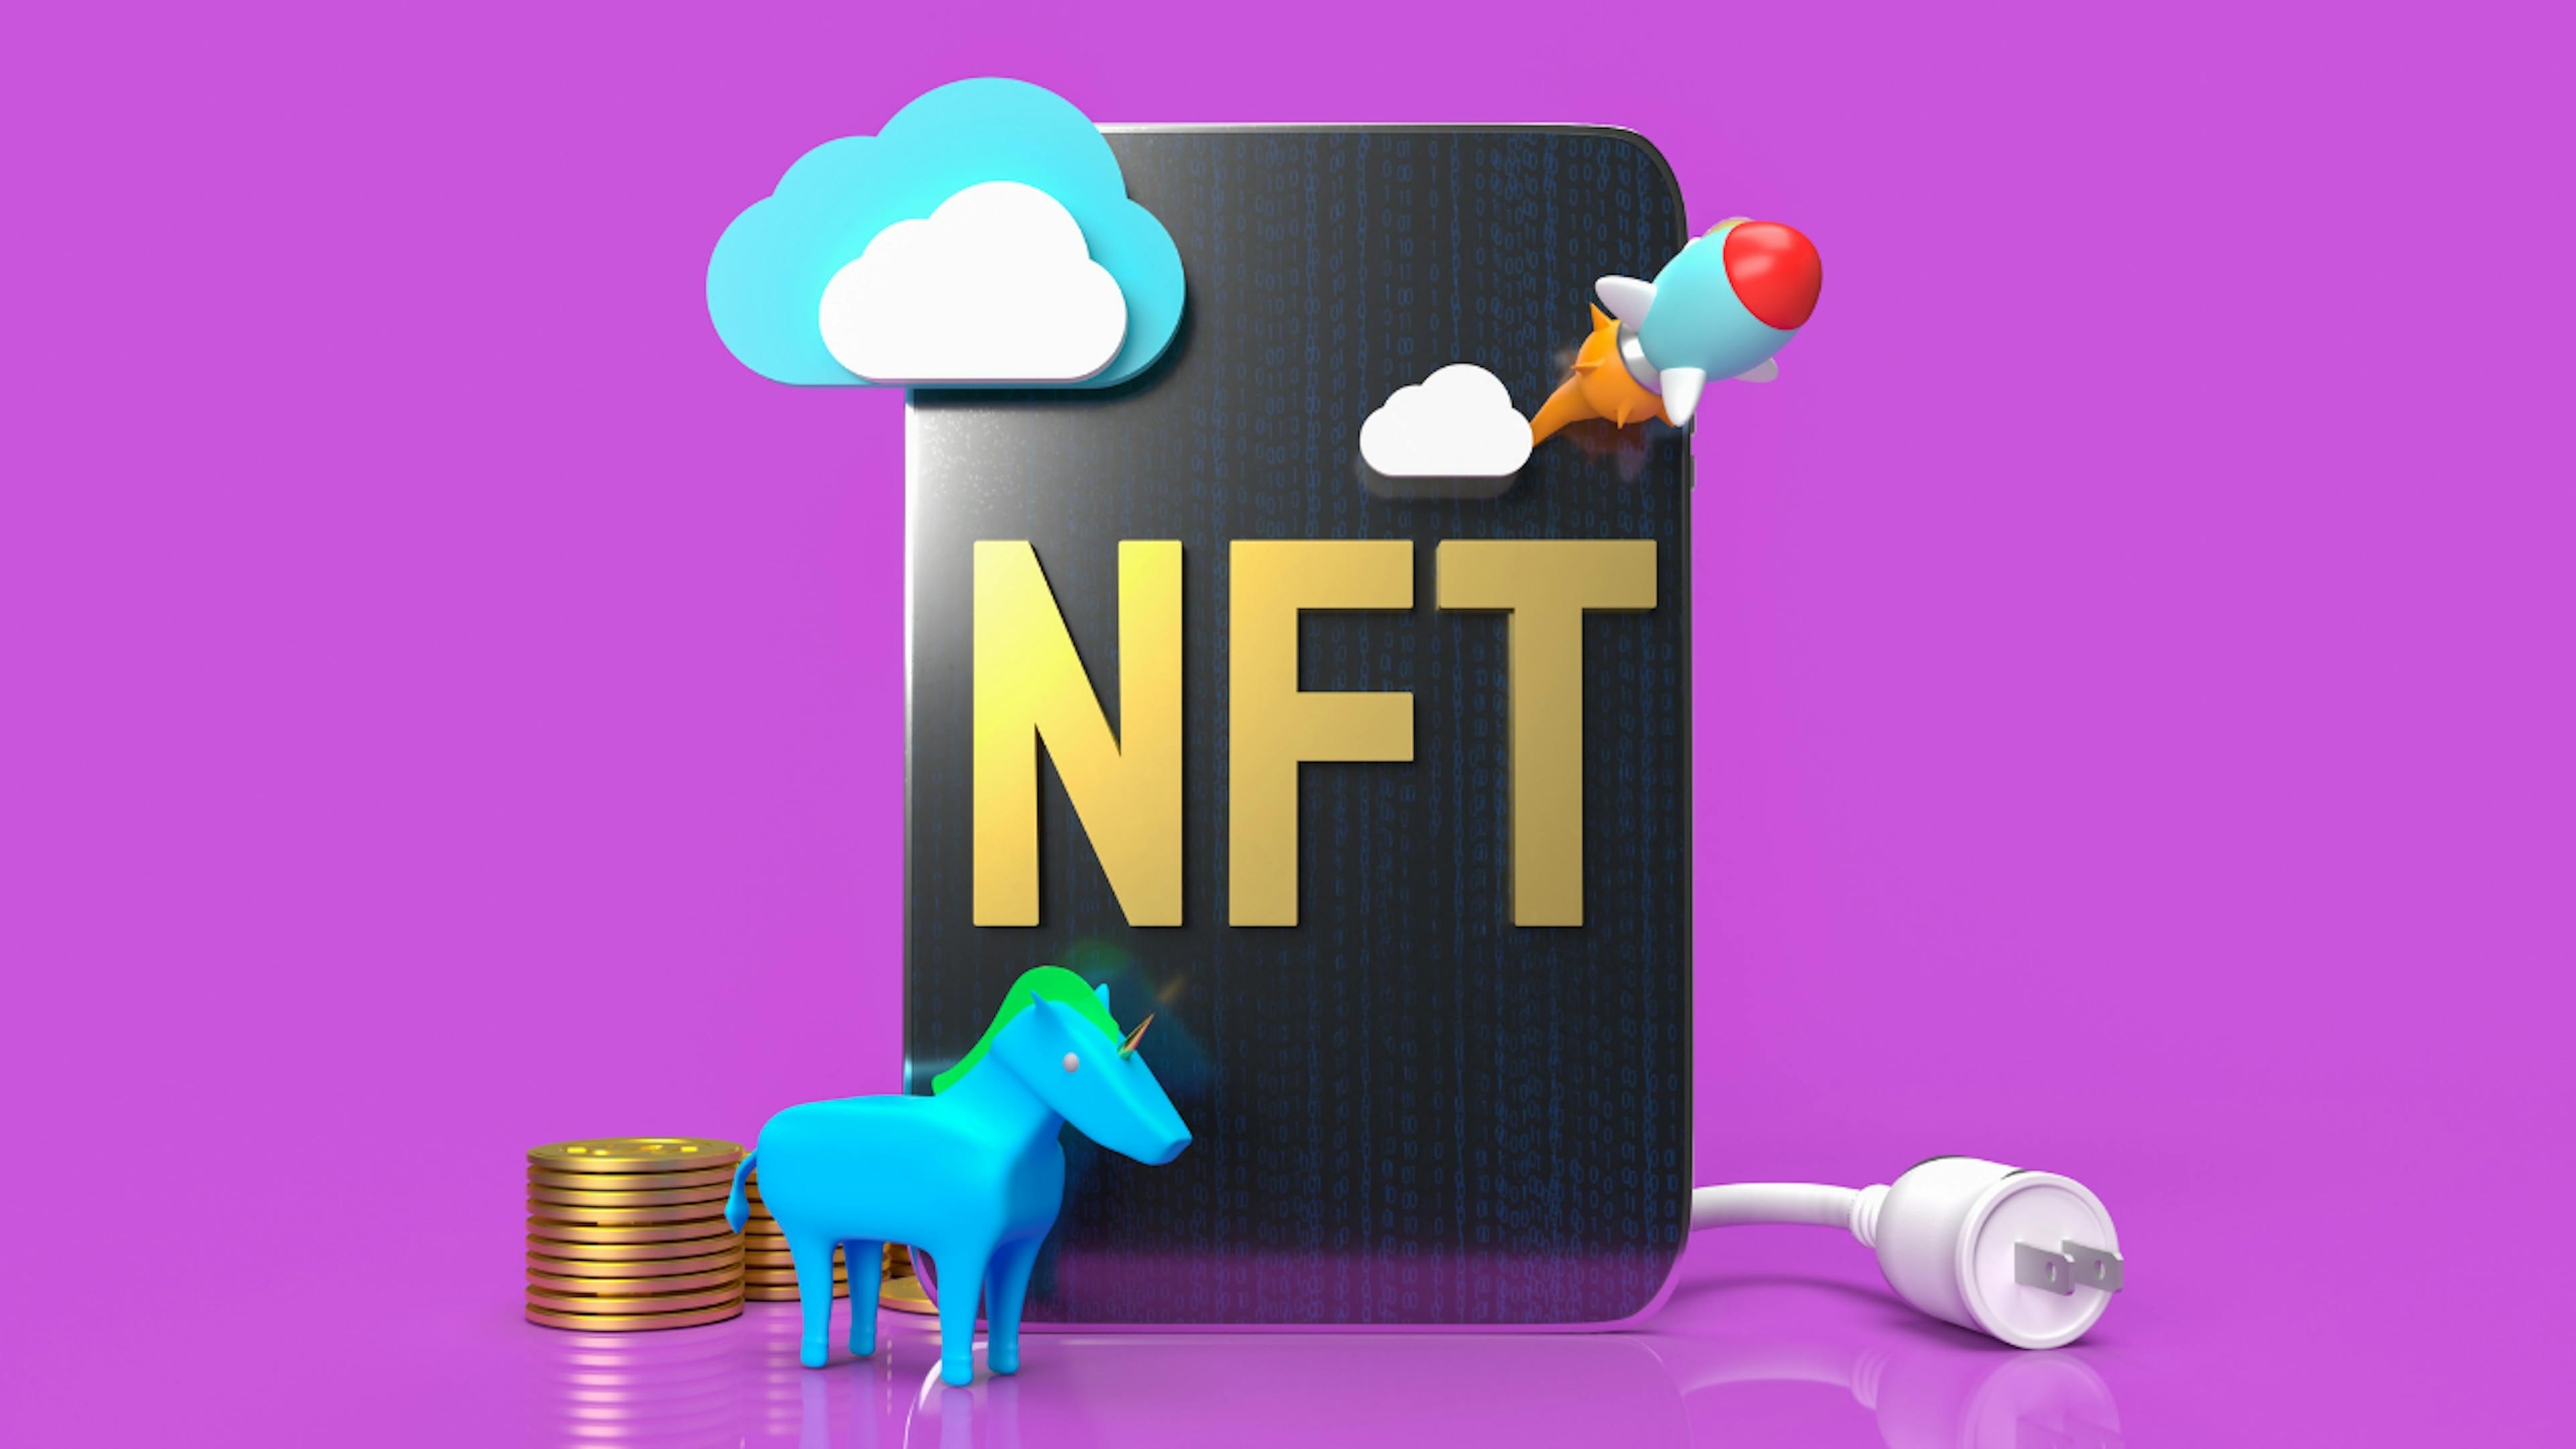 Non-Fungible Tokens (NFTs) are digital pieces of blockchain data that can be linked to real world assets